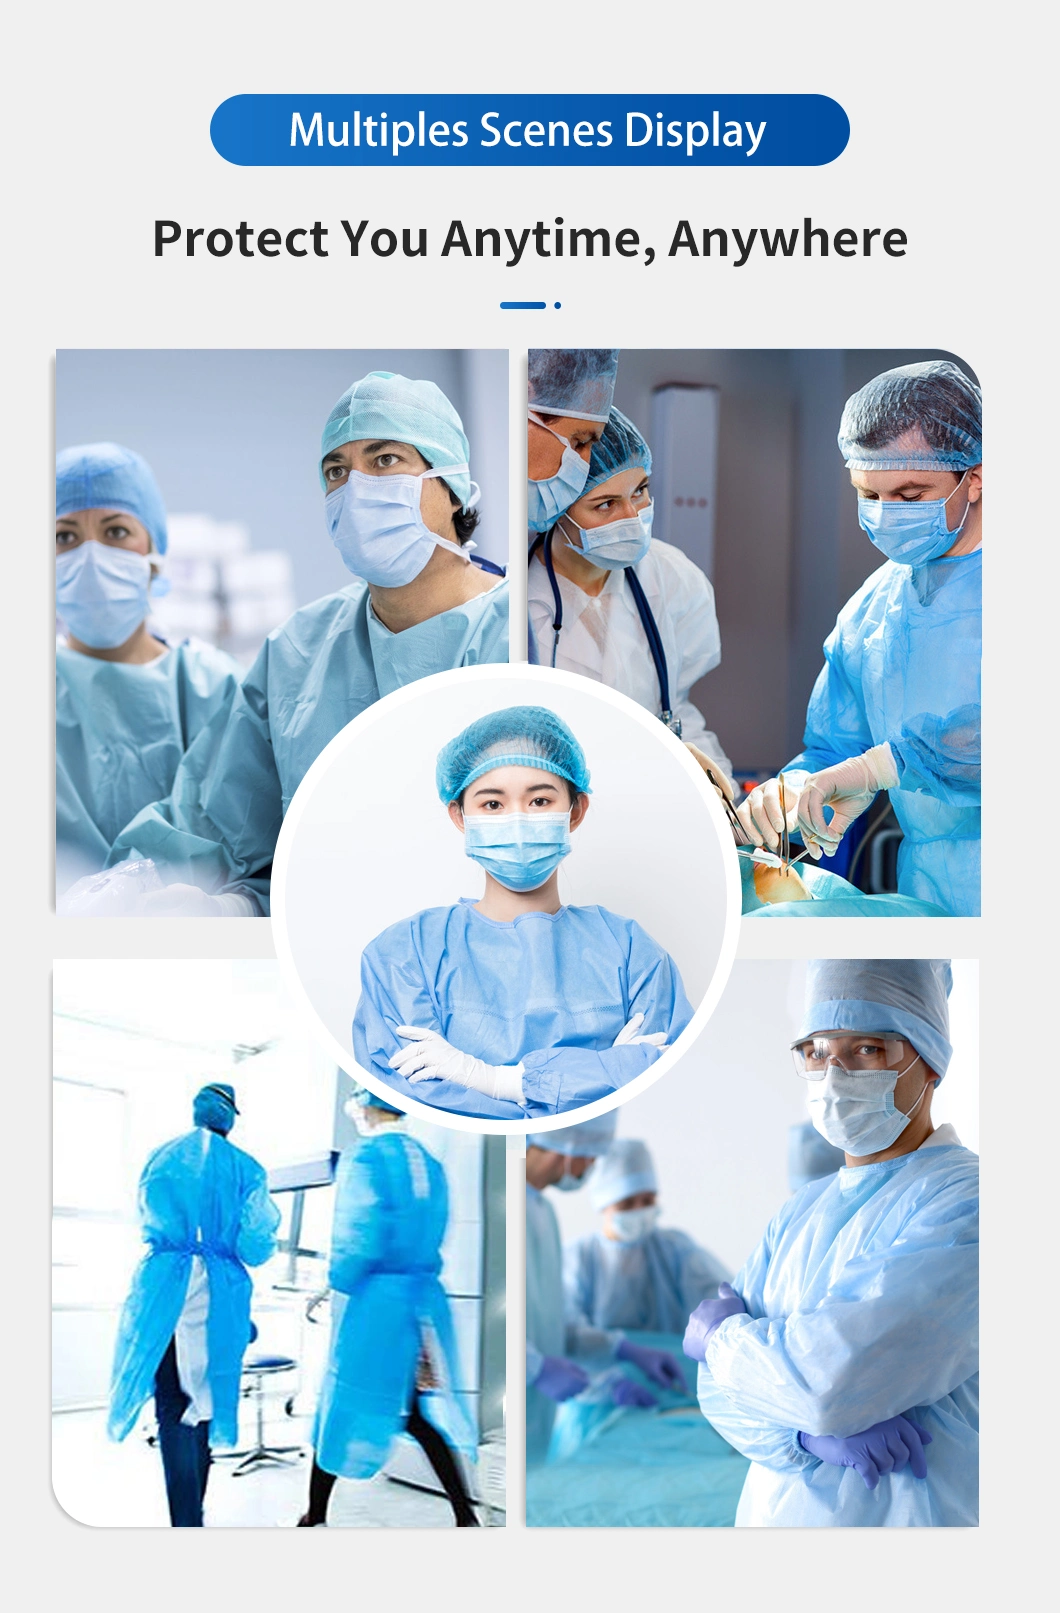 Disposable PP PE Non-Woven Isolation Gown with Knitted Cuffs/Elastic Cuff